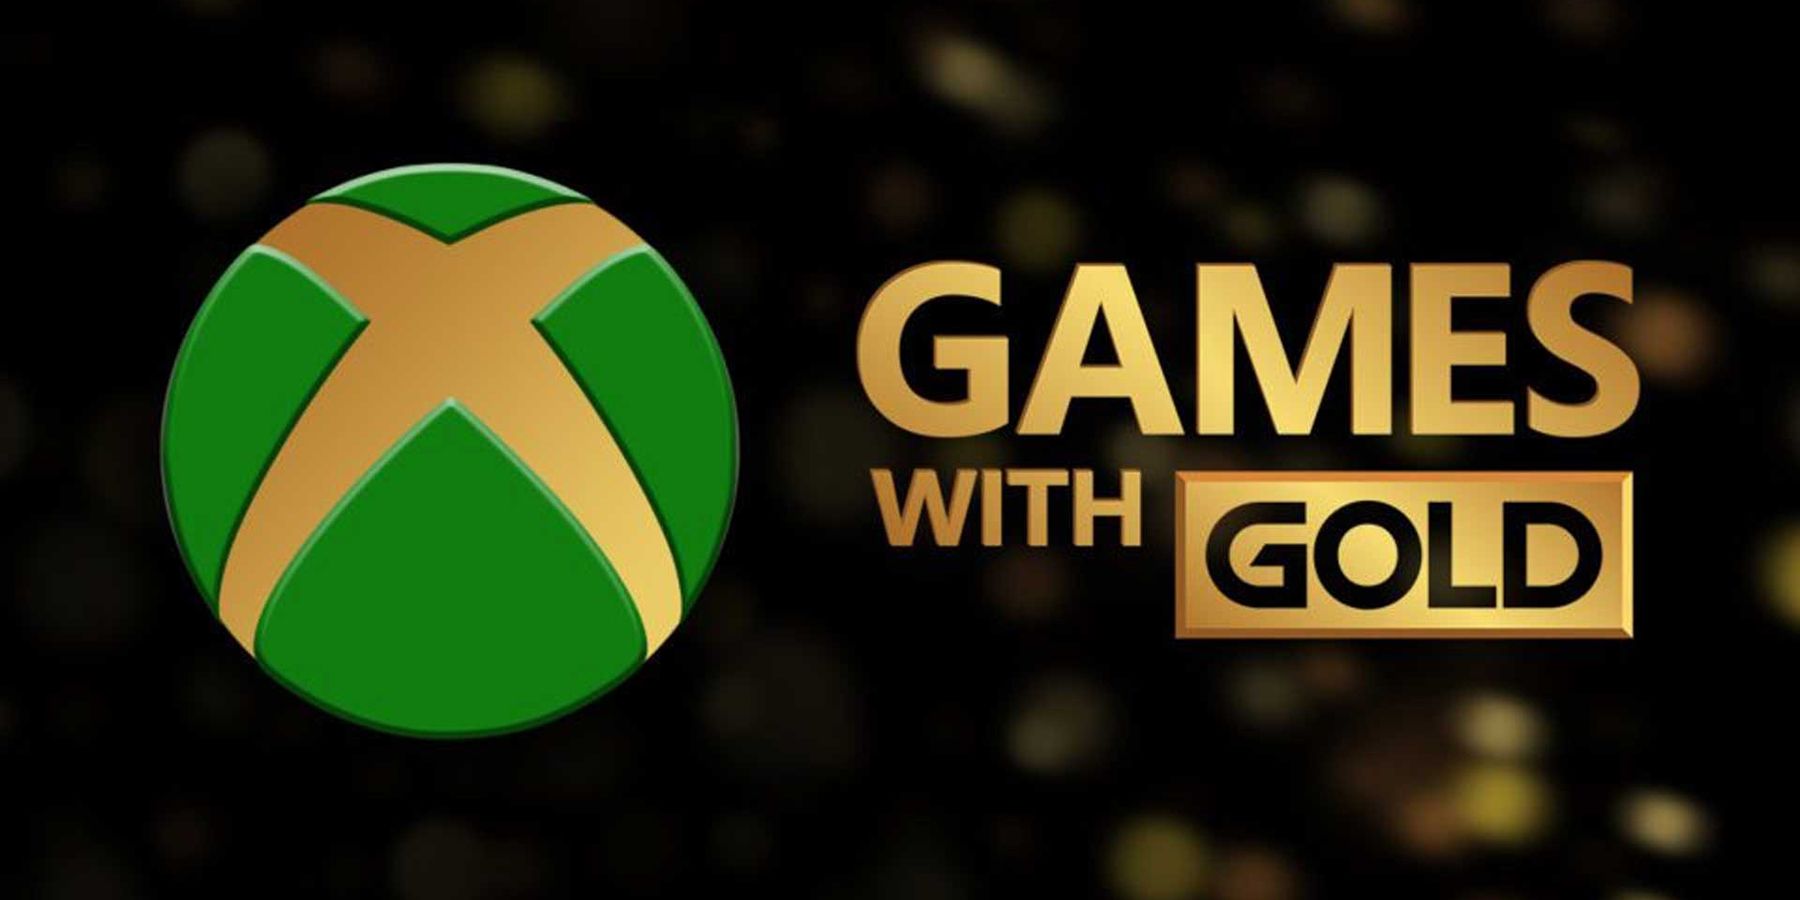 Free Xbox games with Gold for December 2021 Leaked online [UPDATE]